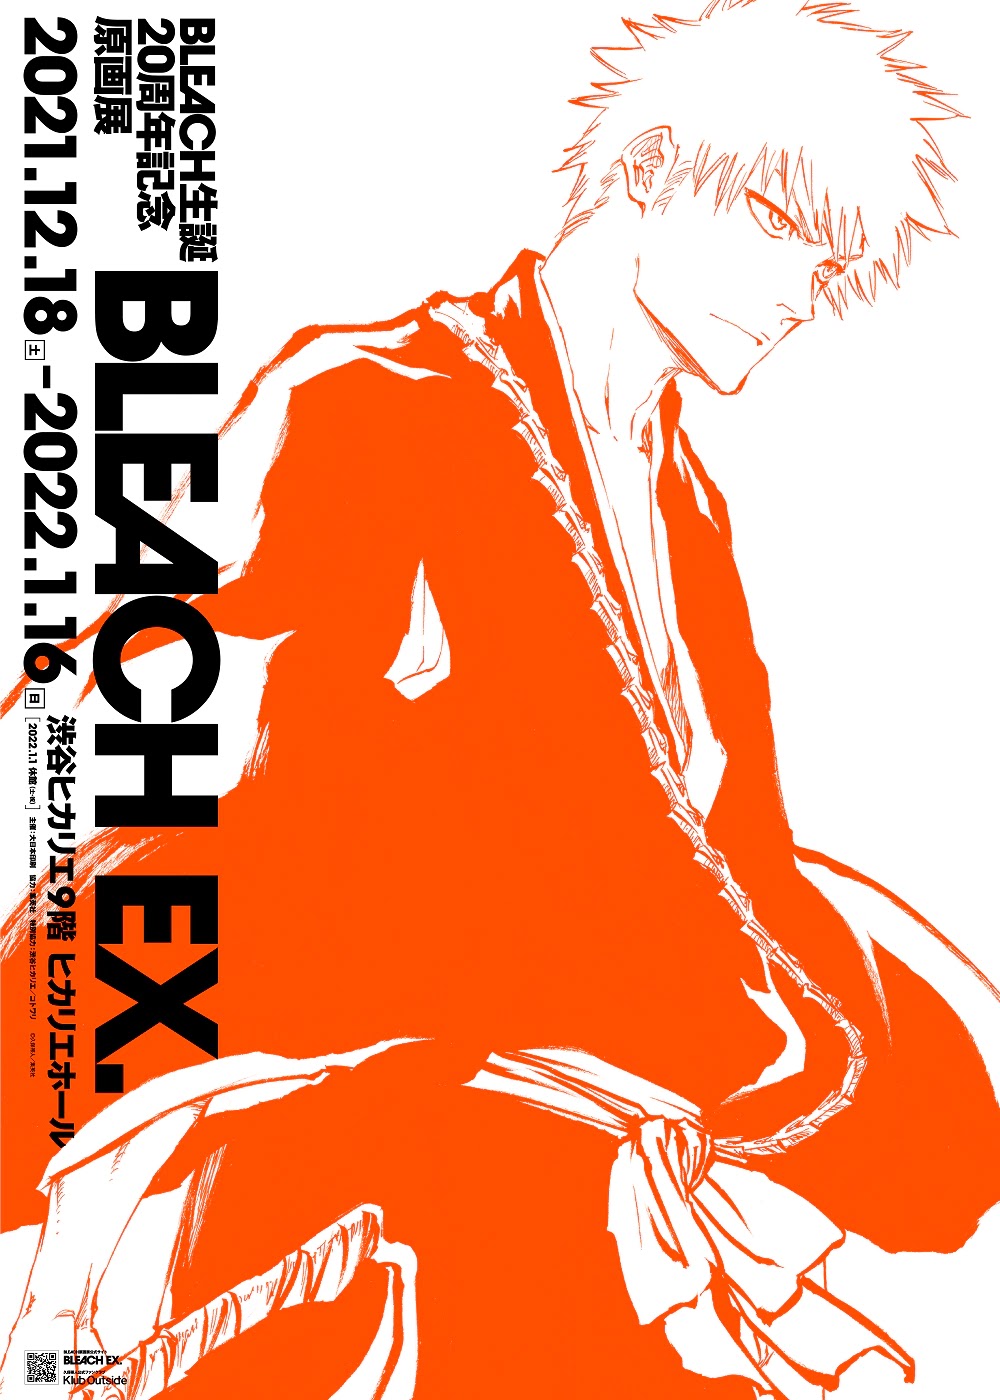 BLEACH EX." New PV released